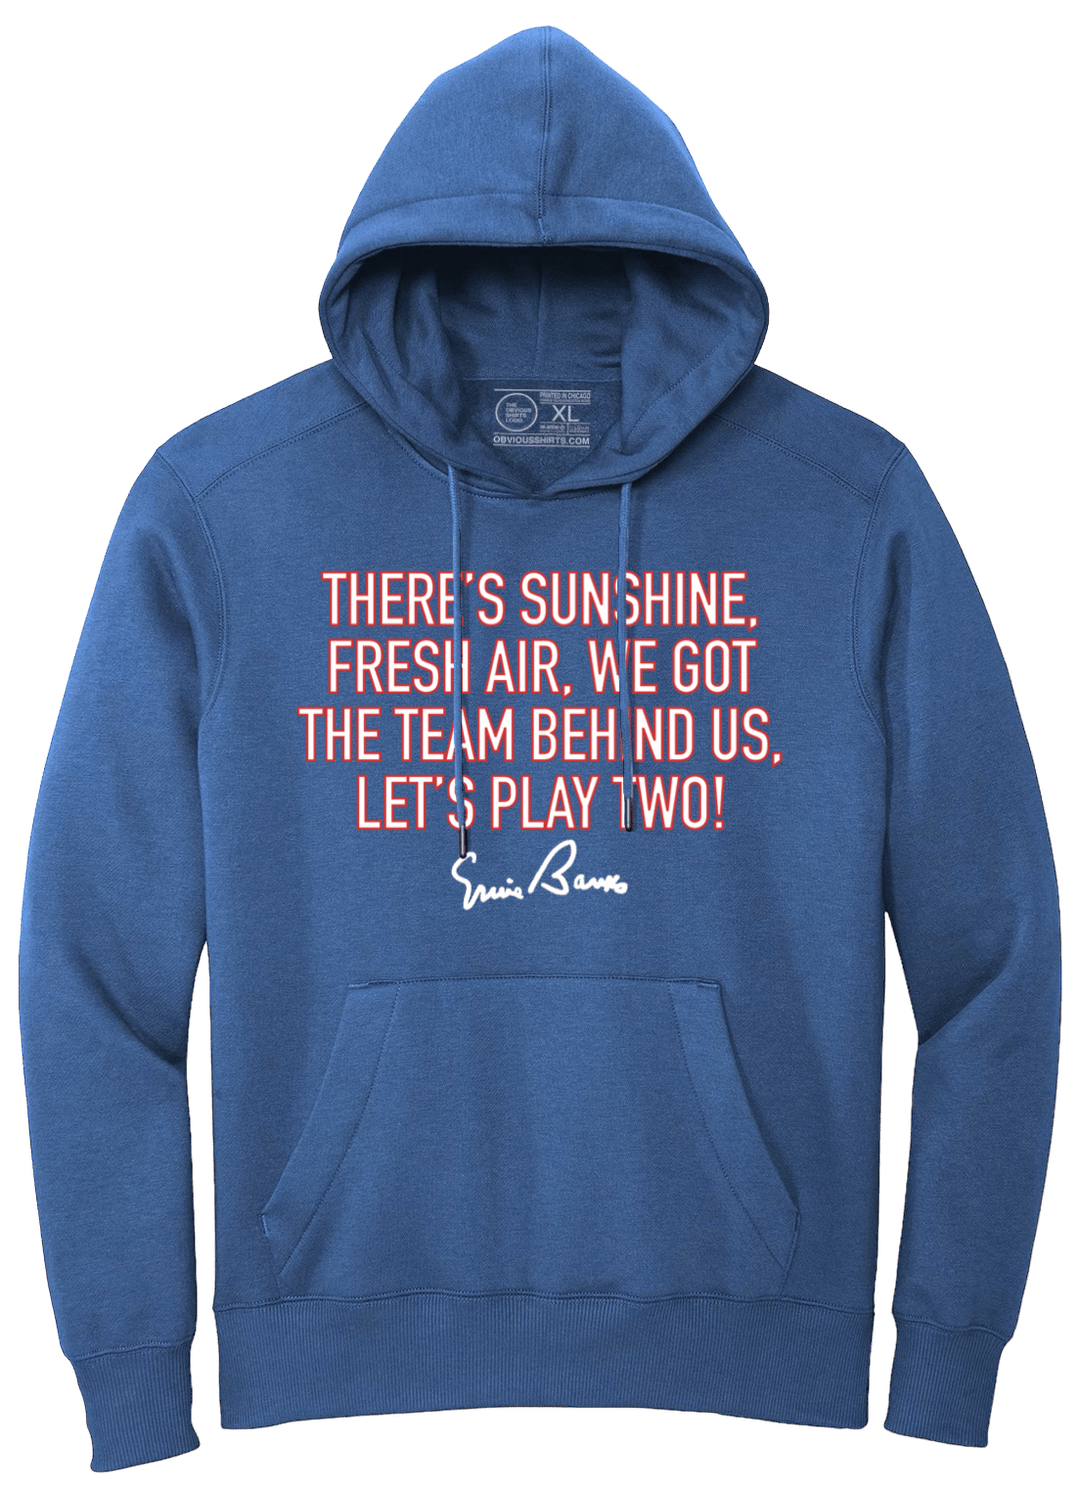 LET'S PLAY TWO! (HOODED SWEATSHIRT) - OBVIOUS SHIRTS